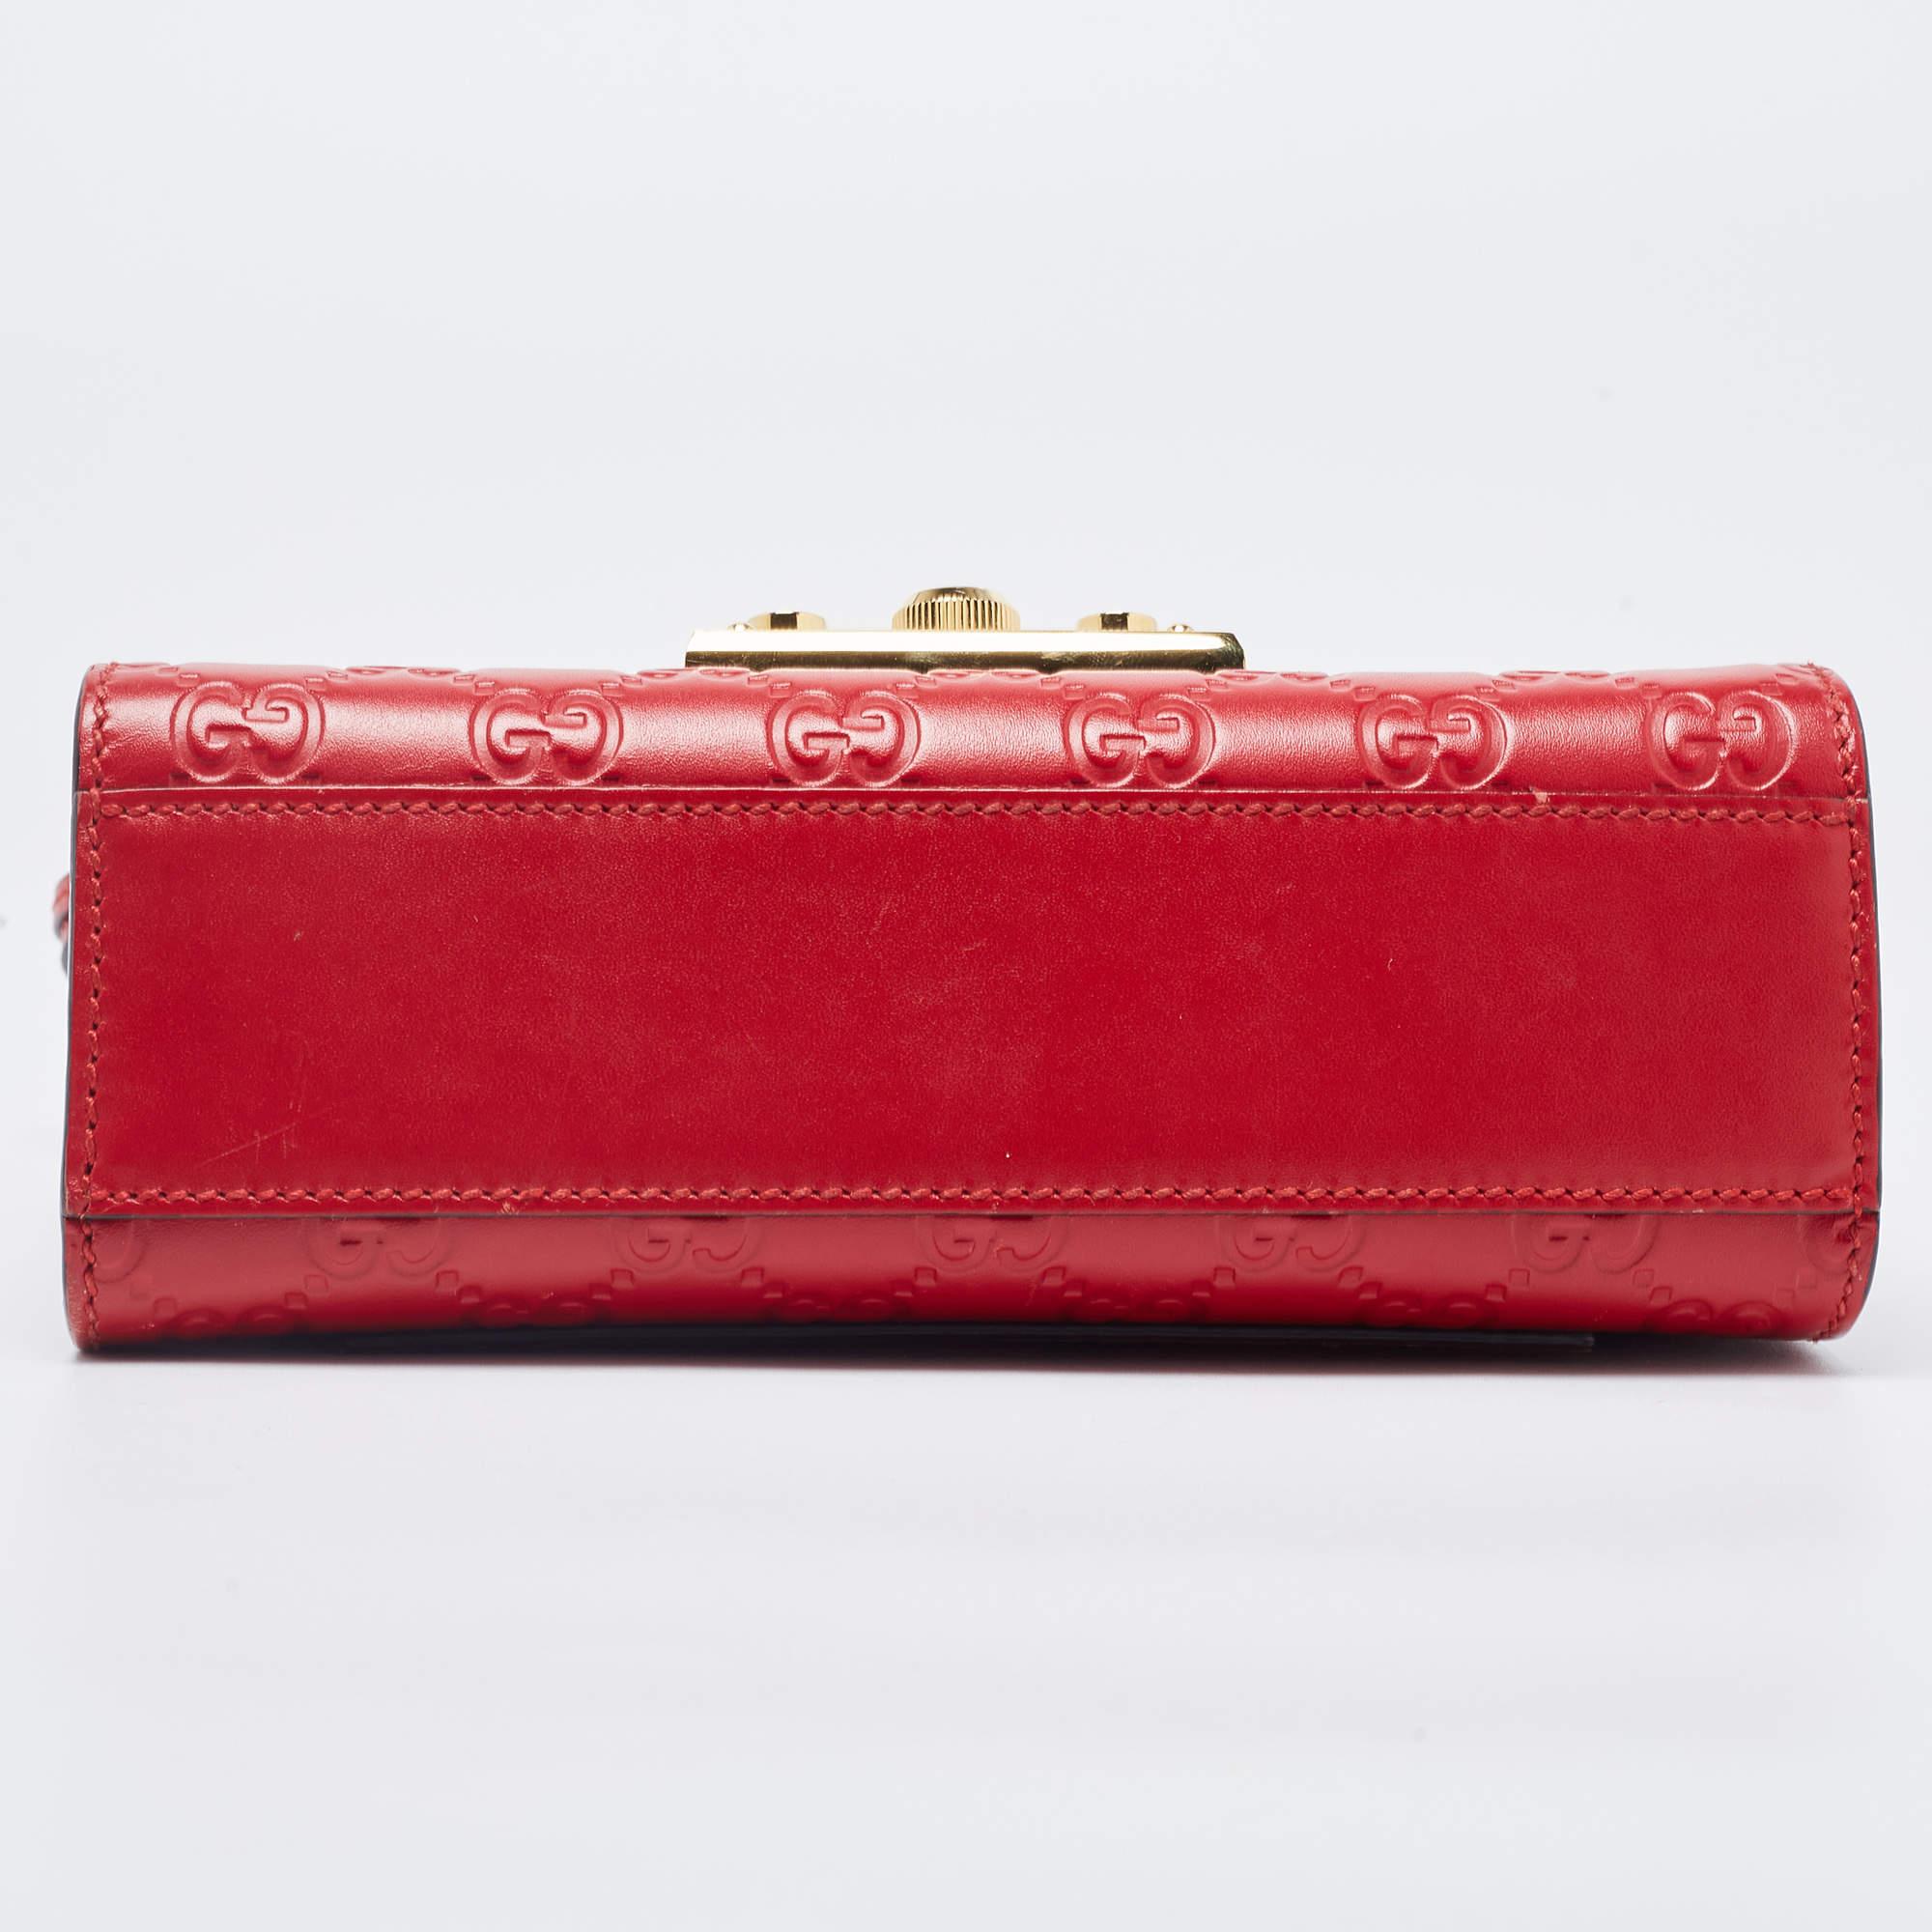 Gucci Red Guccissima Leather Small Padlock Shoulder Bag 14